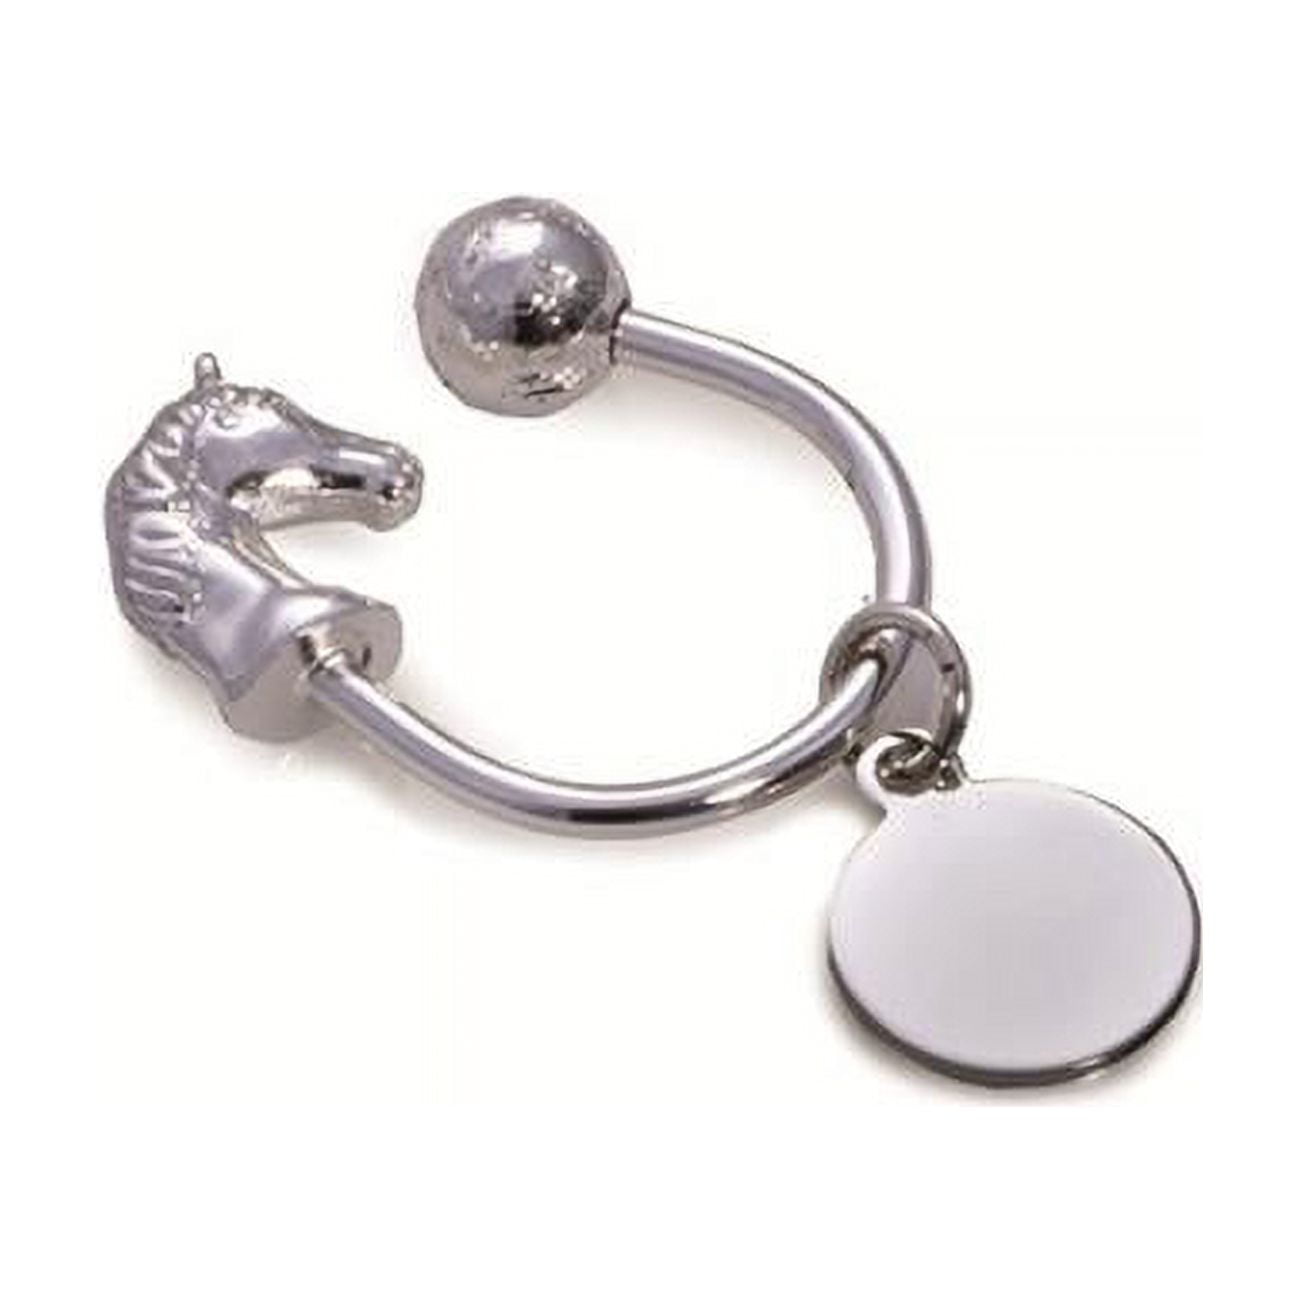 Picture of Bey-Berk International BB146S Silver Plated Horse Head Key Ring with ID Tag